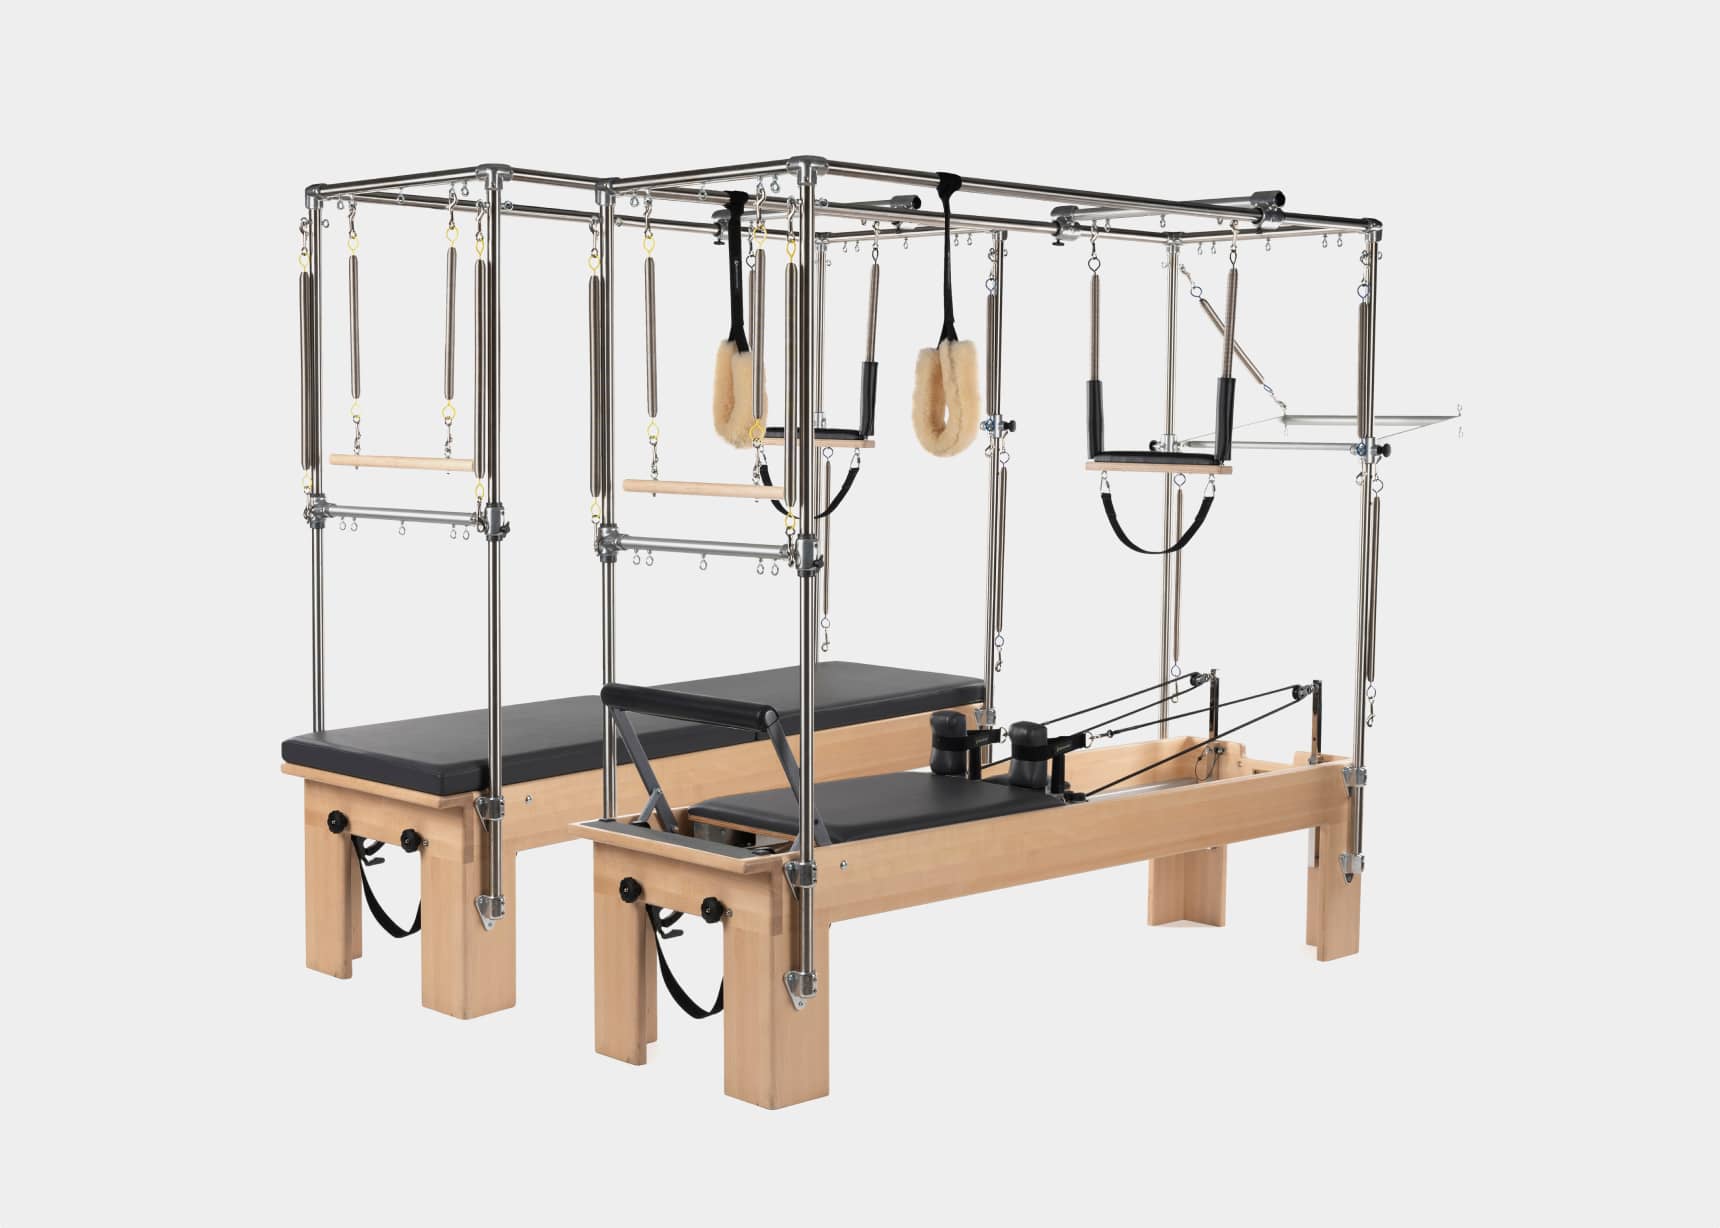 Image showcasing the combination of a Pilates Reformer and Trapeze setup.